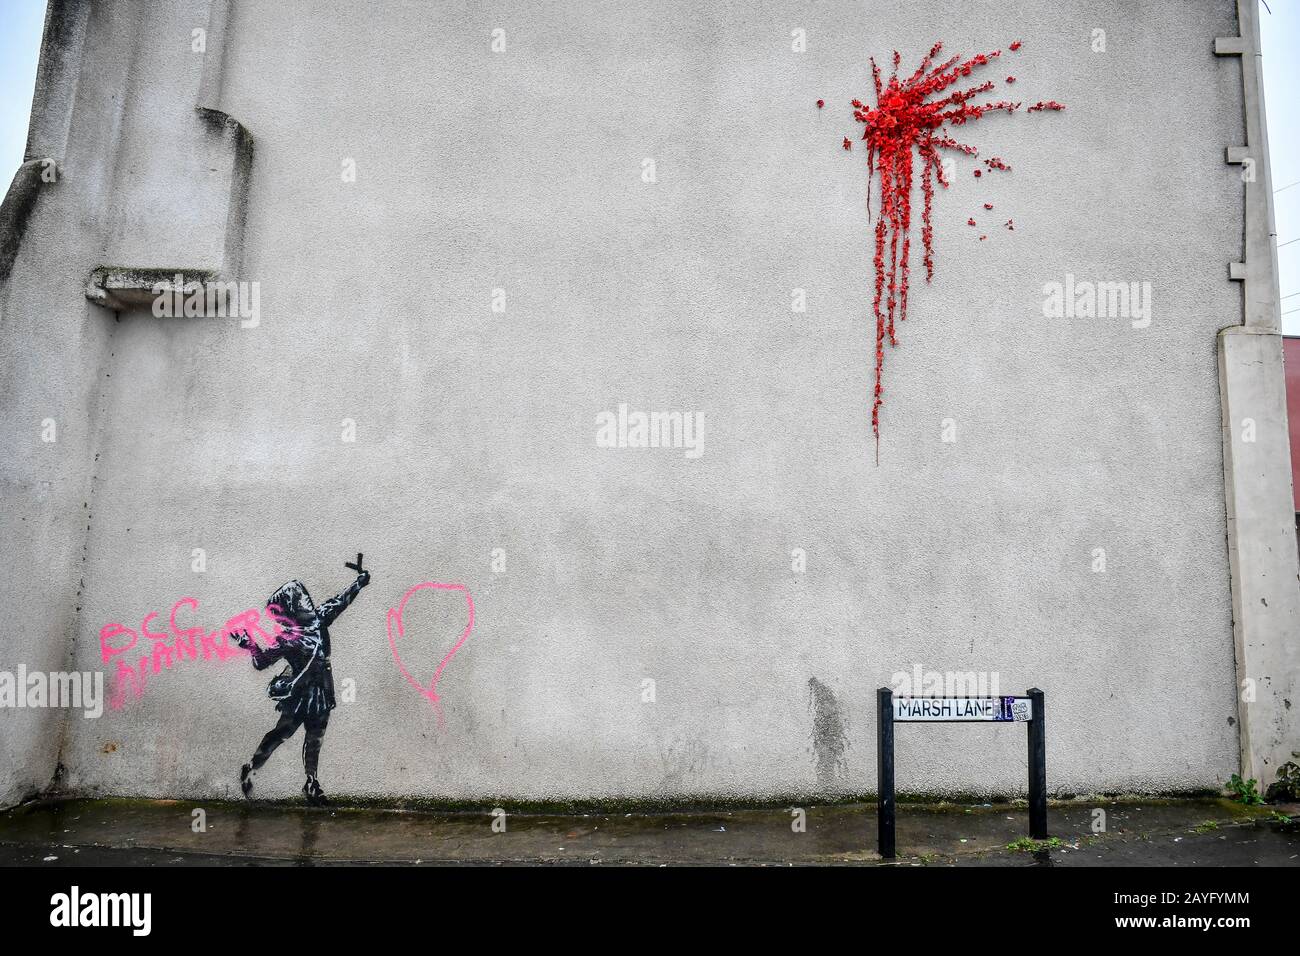 NOTE IMAGE CONTAINS SWEAR WORD A Banksy work of art on the side of a house on Marsh Lane, Barton Hill, Bristol, which has been vandalised with pink spray paint, the day after it was confirmed on Valentine's Day. Stock Photo